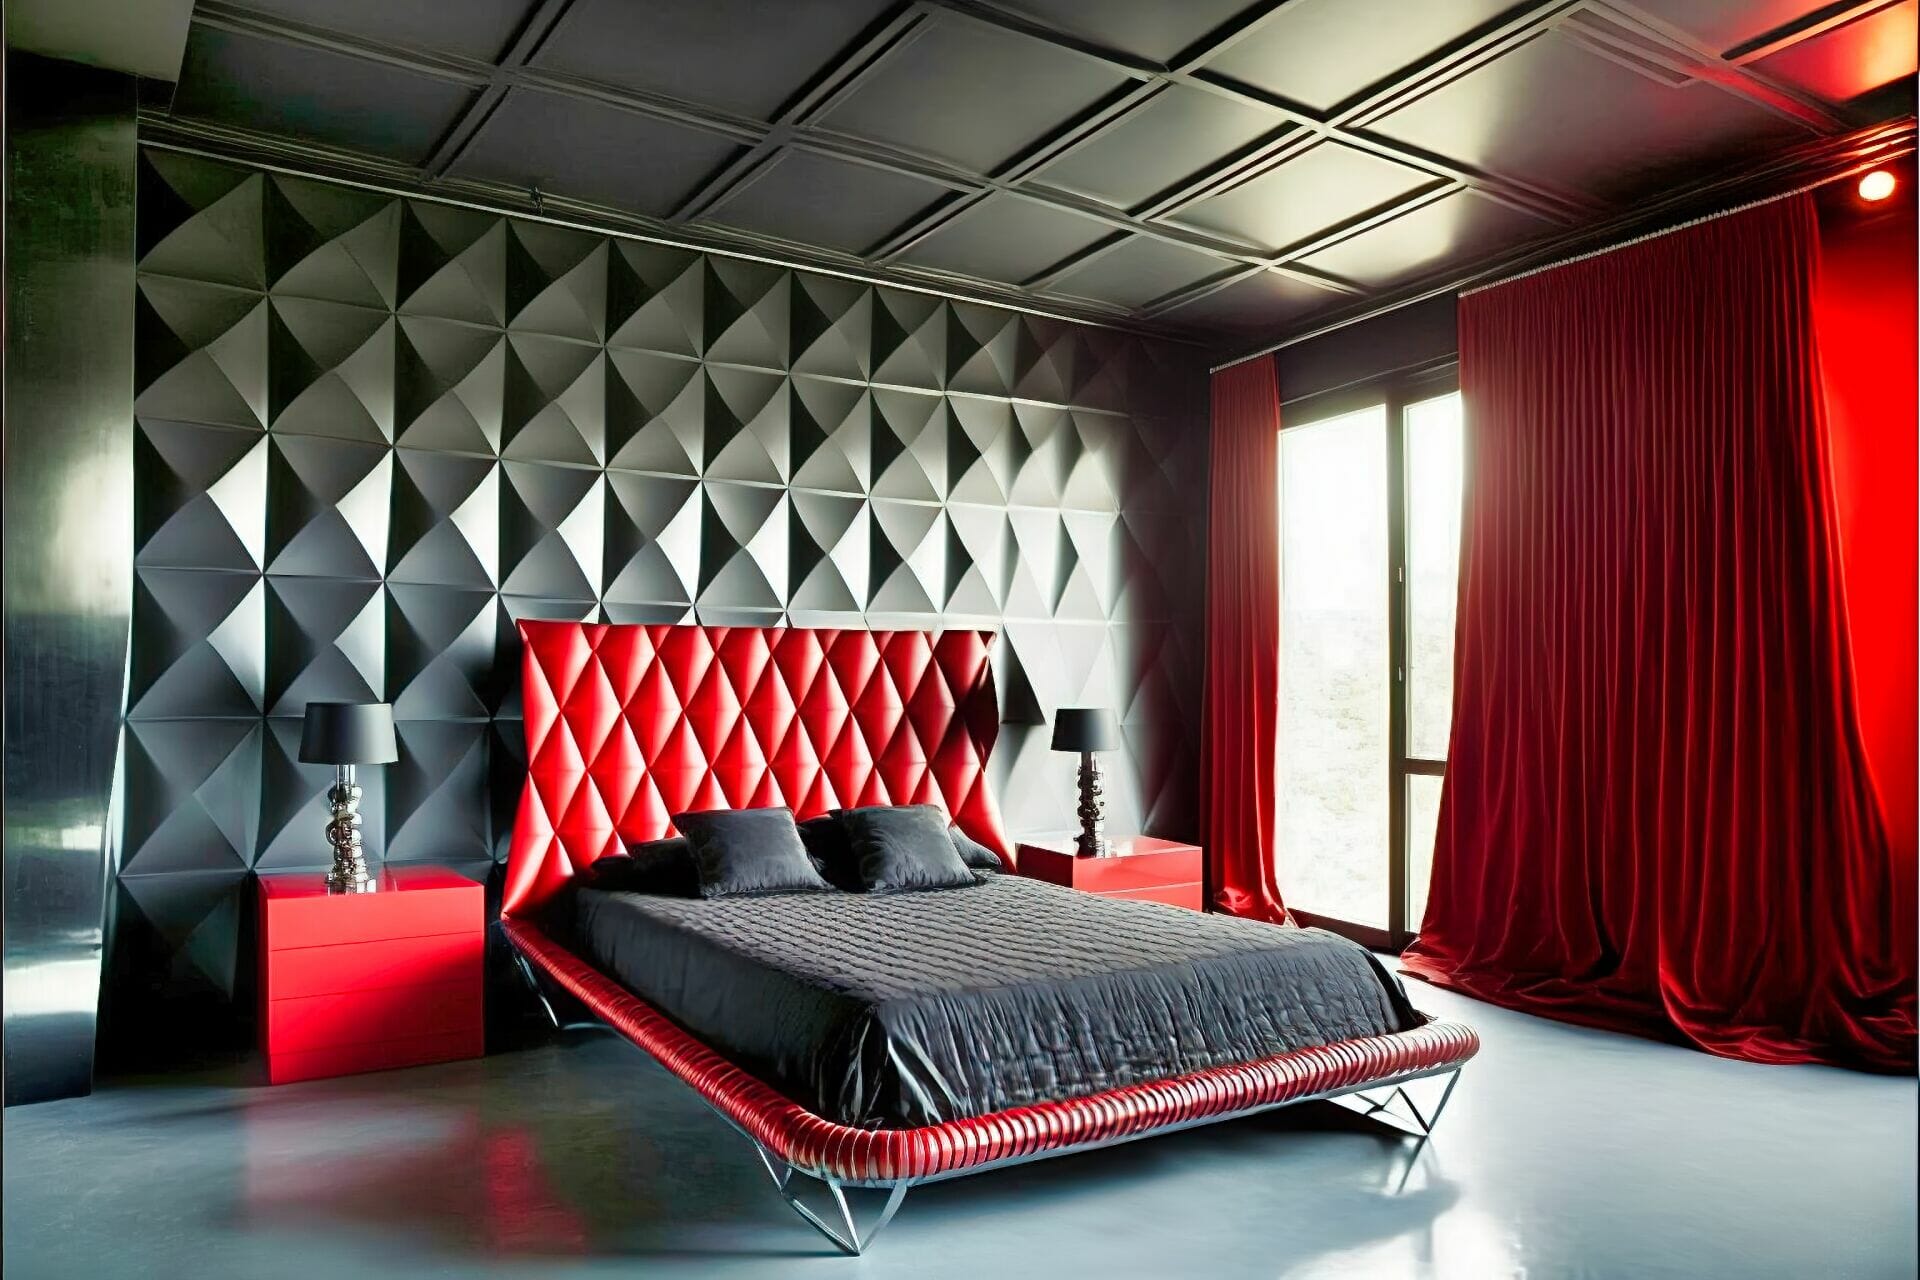 Futuristic Style Bedroom With A Bold And Edgy Look: This Edgy Bedroom Features Bold And Industrial Elements, Including A Large Bed With A Tufted Headboard And A Variety Of Steel And Chrome Furniture Pieces. The Walls And Ceiling Are Painted A Vibrant Red, And The Floor Is Made Up Of Sleek Black Tiles.